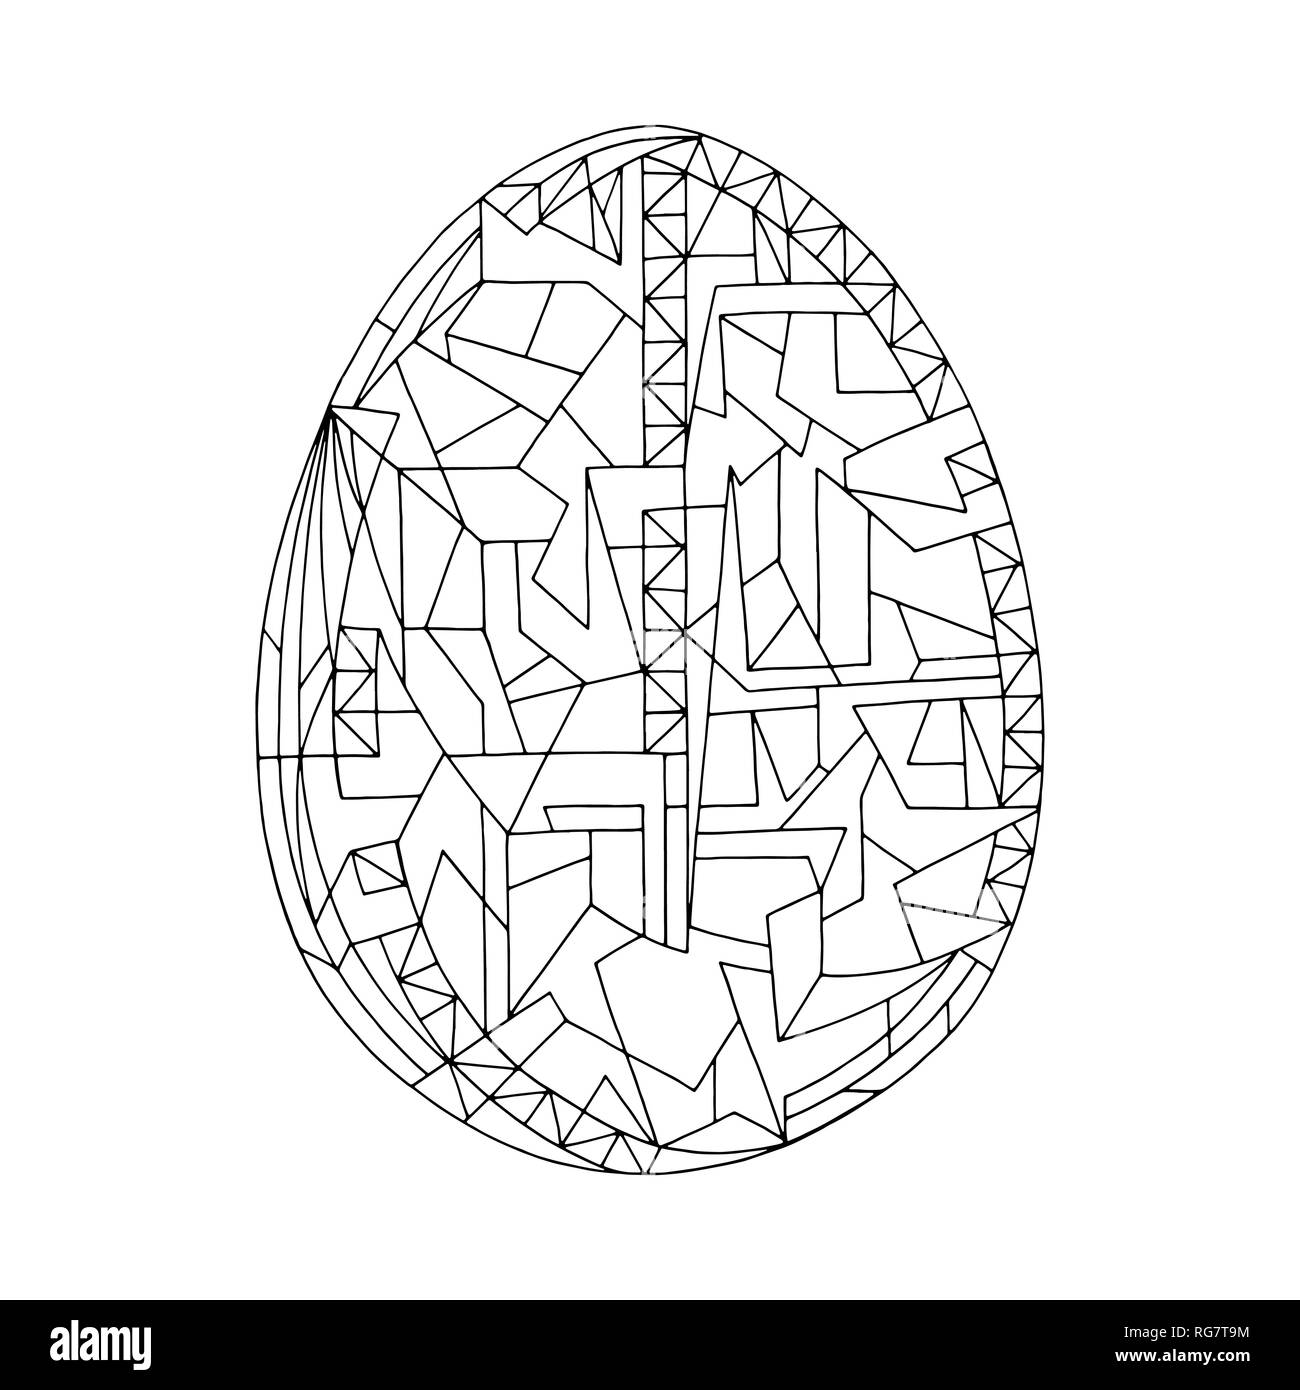 Easter egg coloring book vector illustration. Hand drawn abstract holidays object in contemporary style. Stock Vector